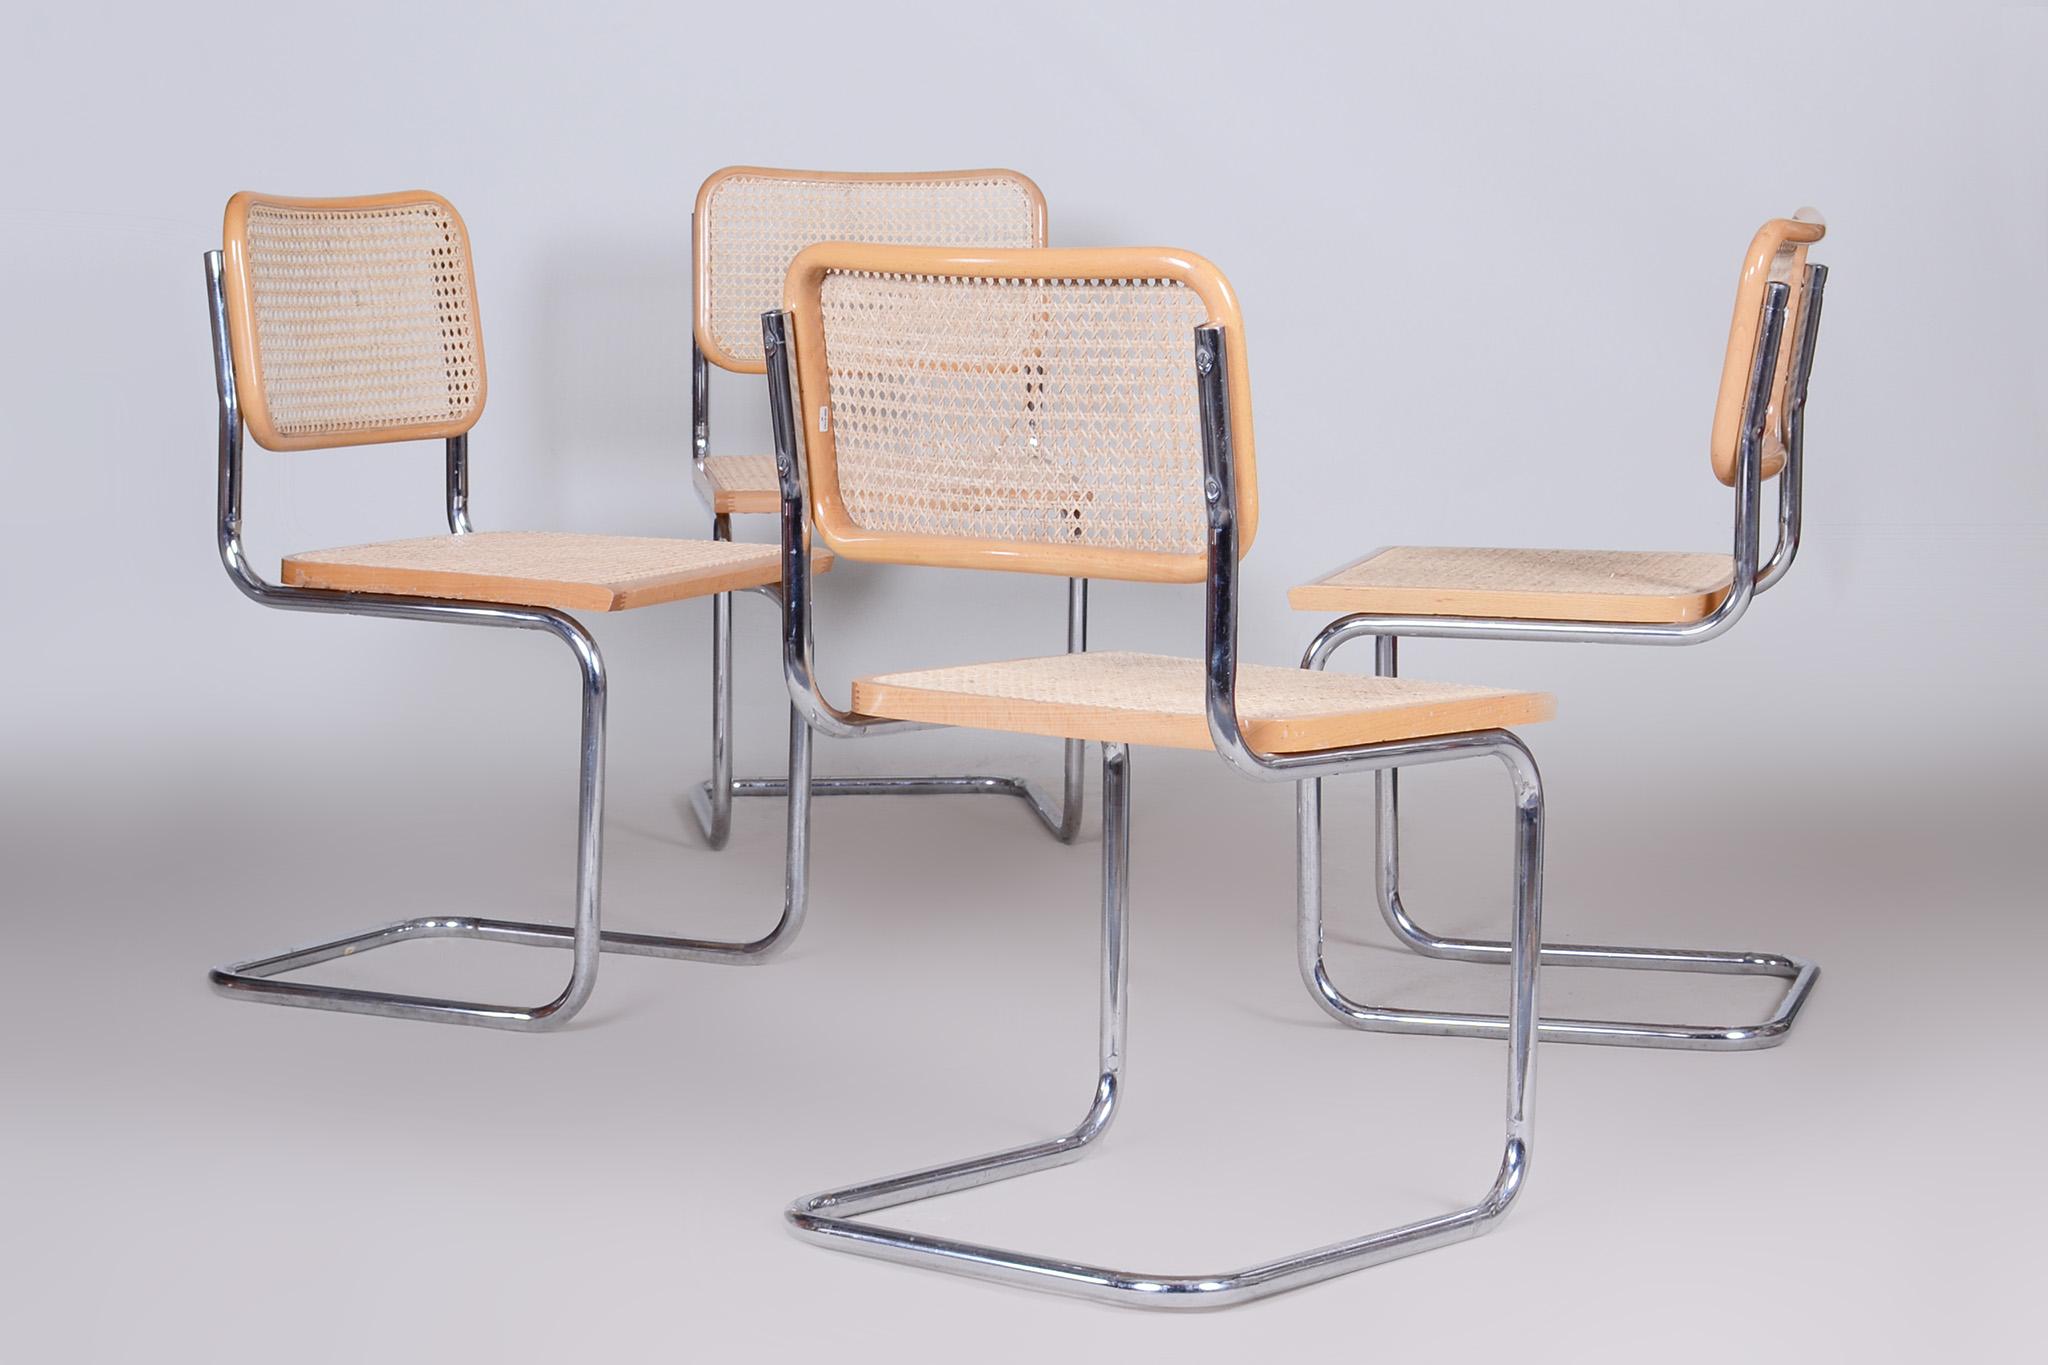 Set of Four Bauhaus Chairs, Chrome-Plated Steel, Rattan, Beech, Italy, 1960s For Sale 4